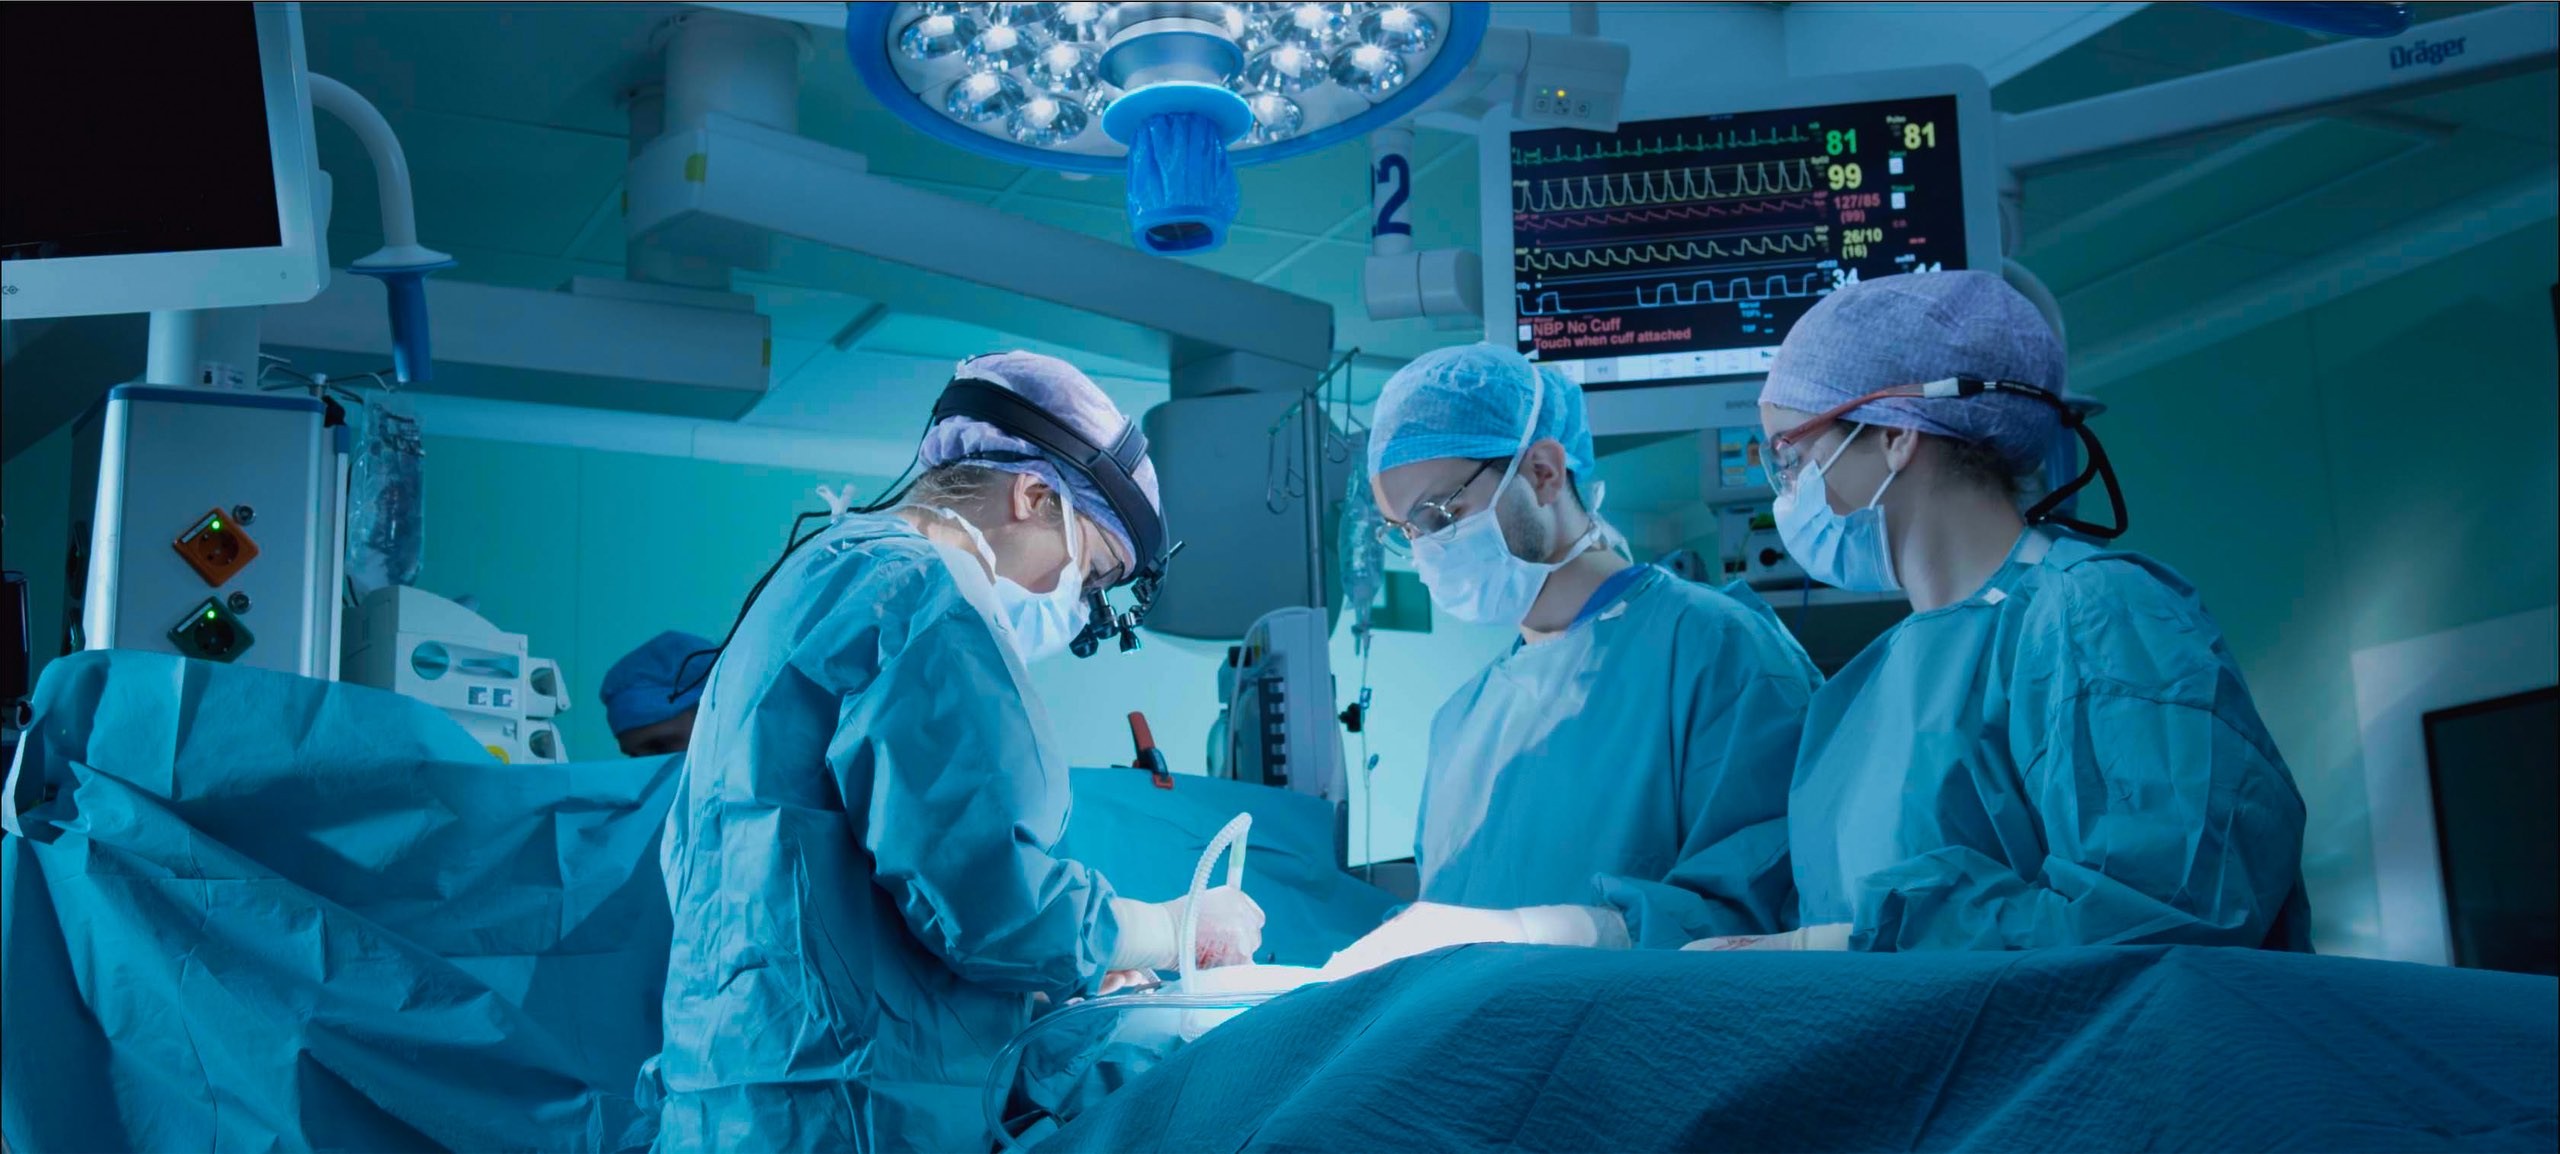 Surgeons doing surgery in an operating room.jpg